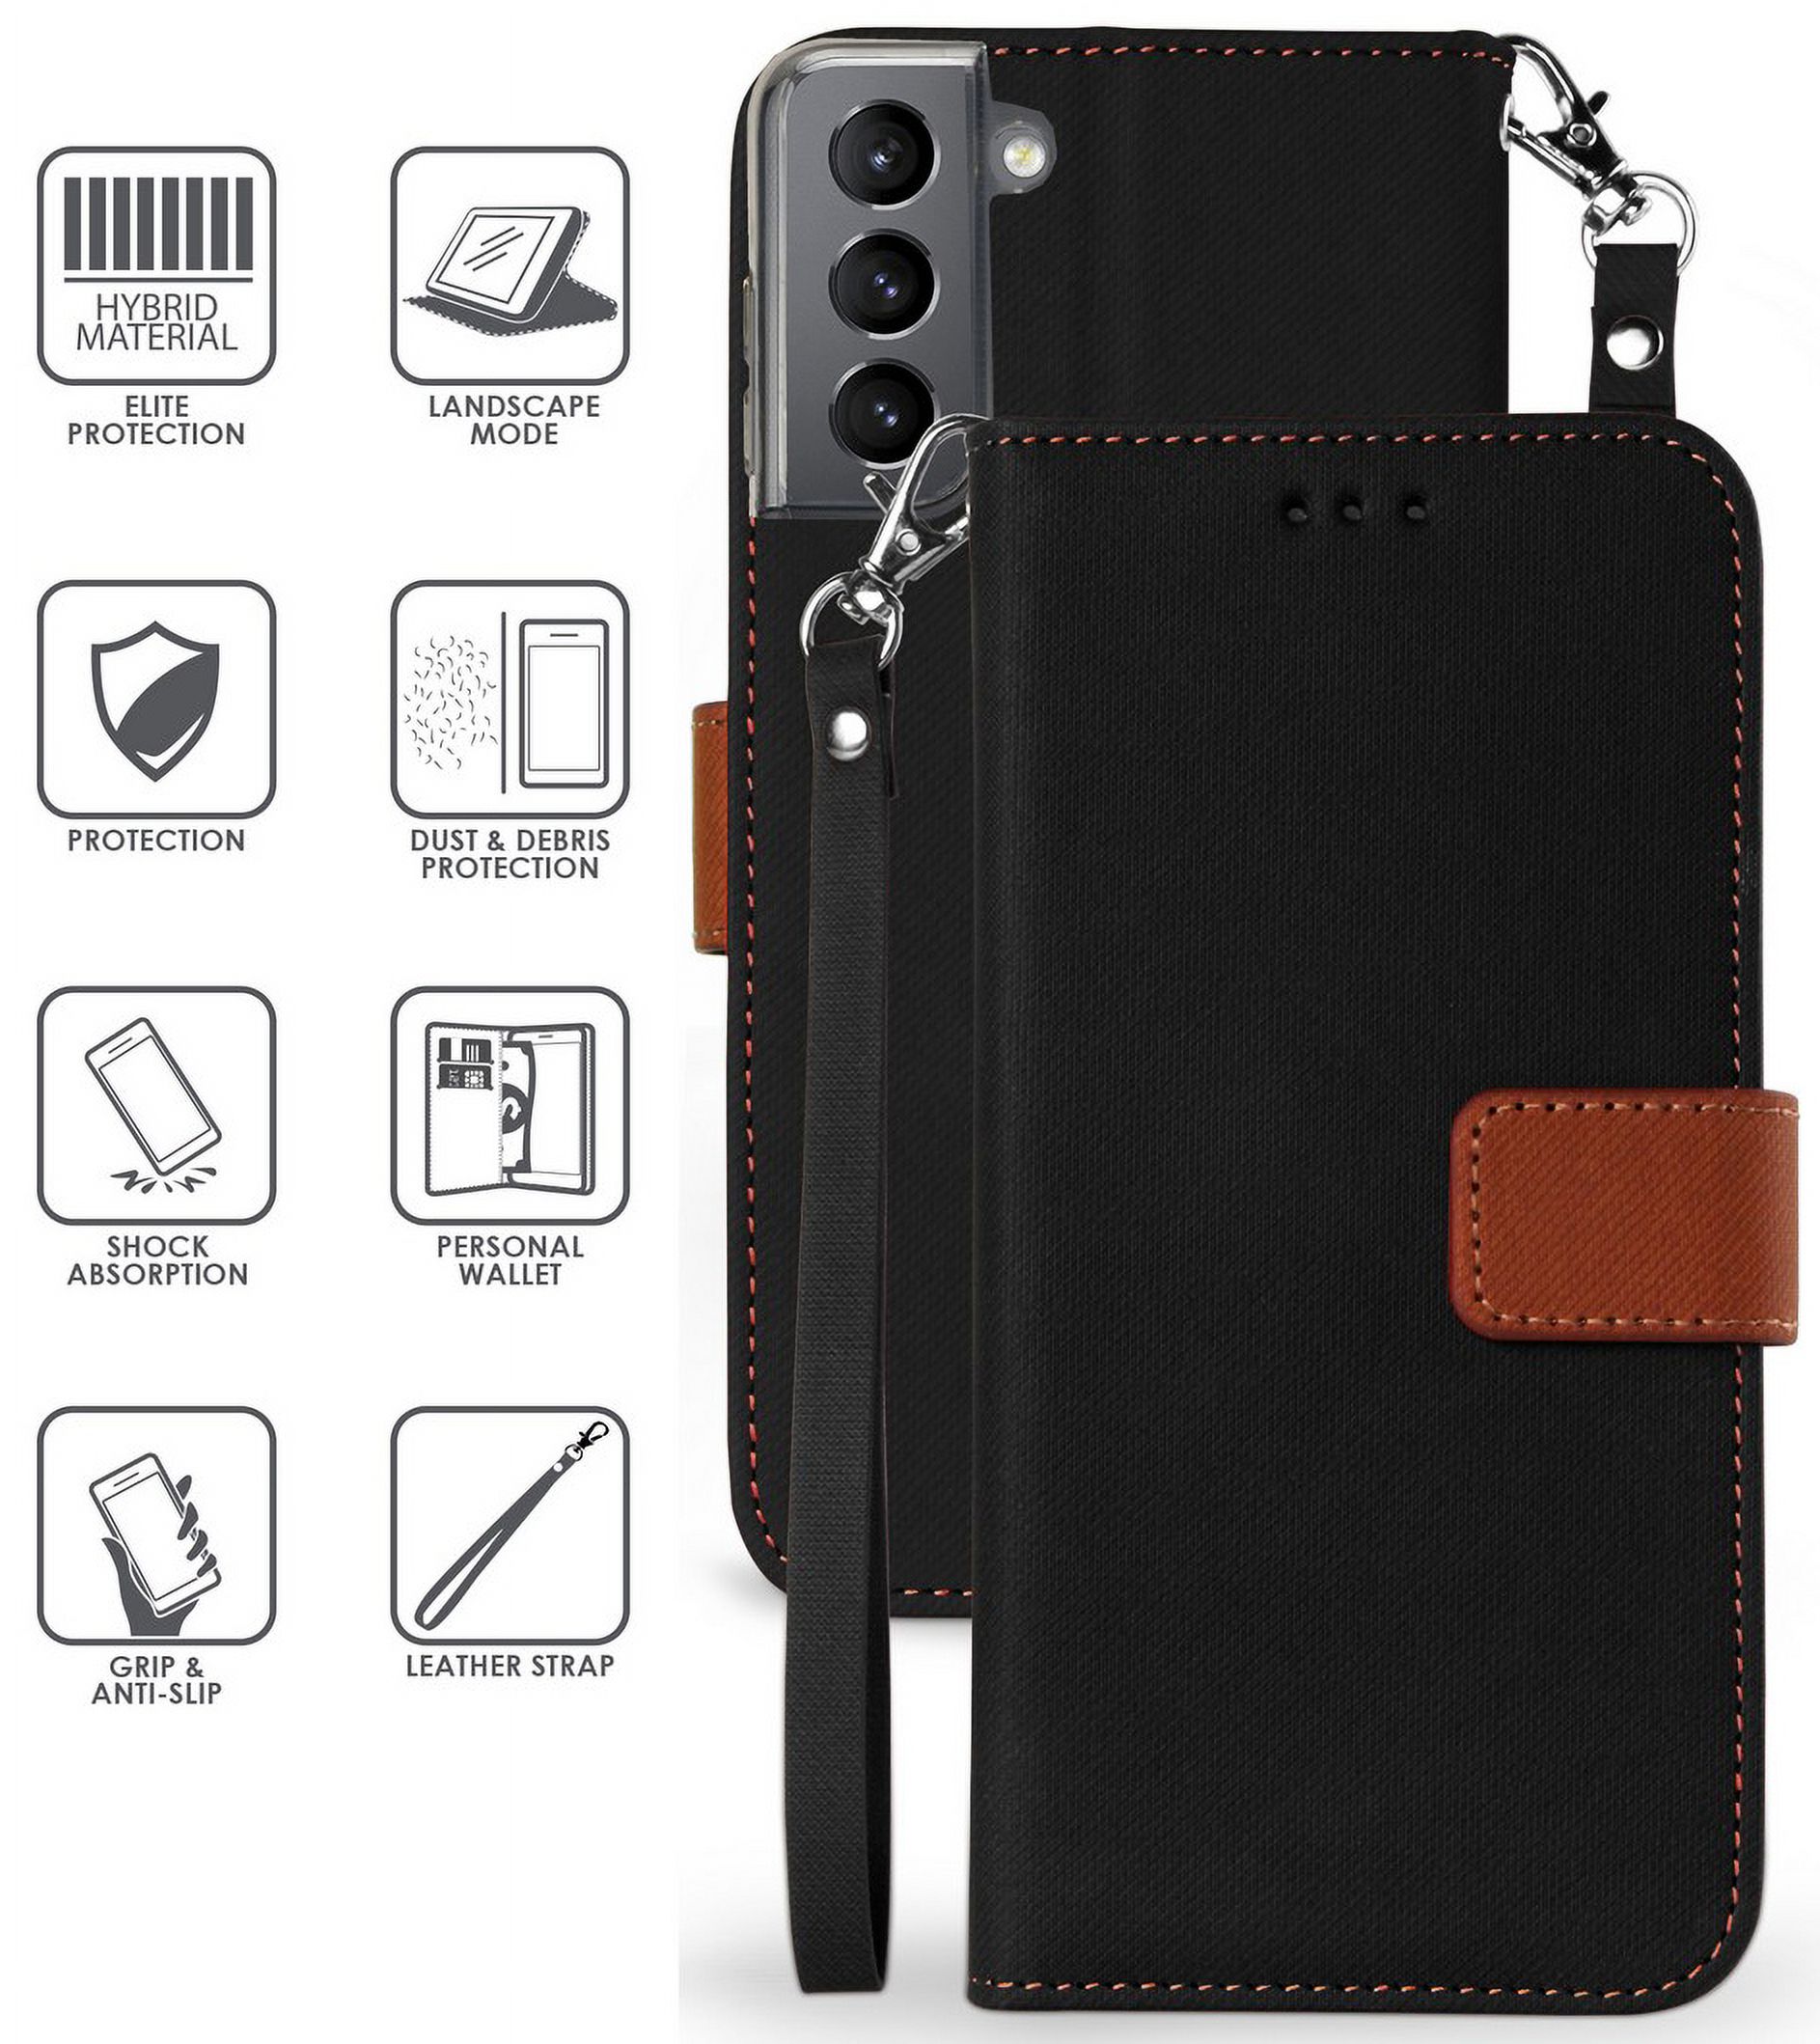 Wallet Phone Case for Galaxy S21 5G, [Black/Brown] Folio Credit Card Slot ID Cover, View Stand [with Magnetic Closure, Wrist Strap Lanyard] for Samsung Galaxy S21 5G (SM-G991) - image 4 of 8